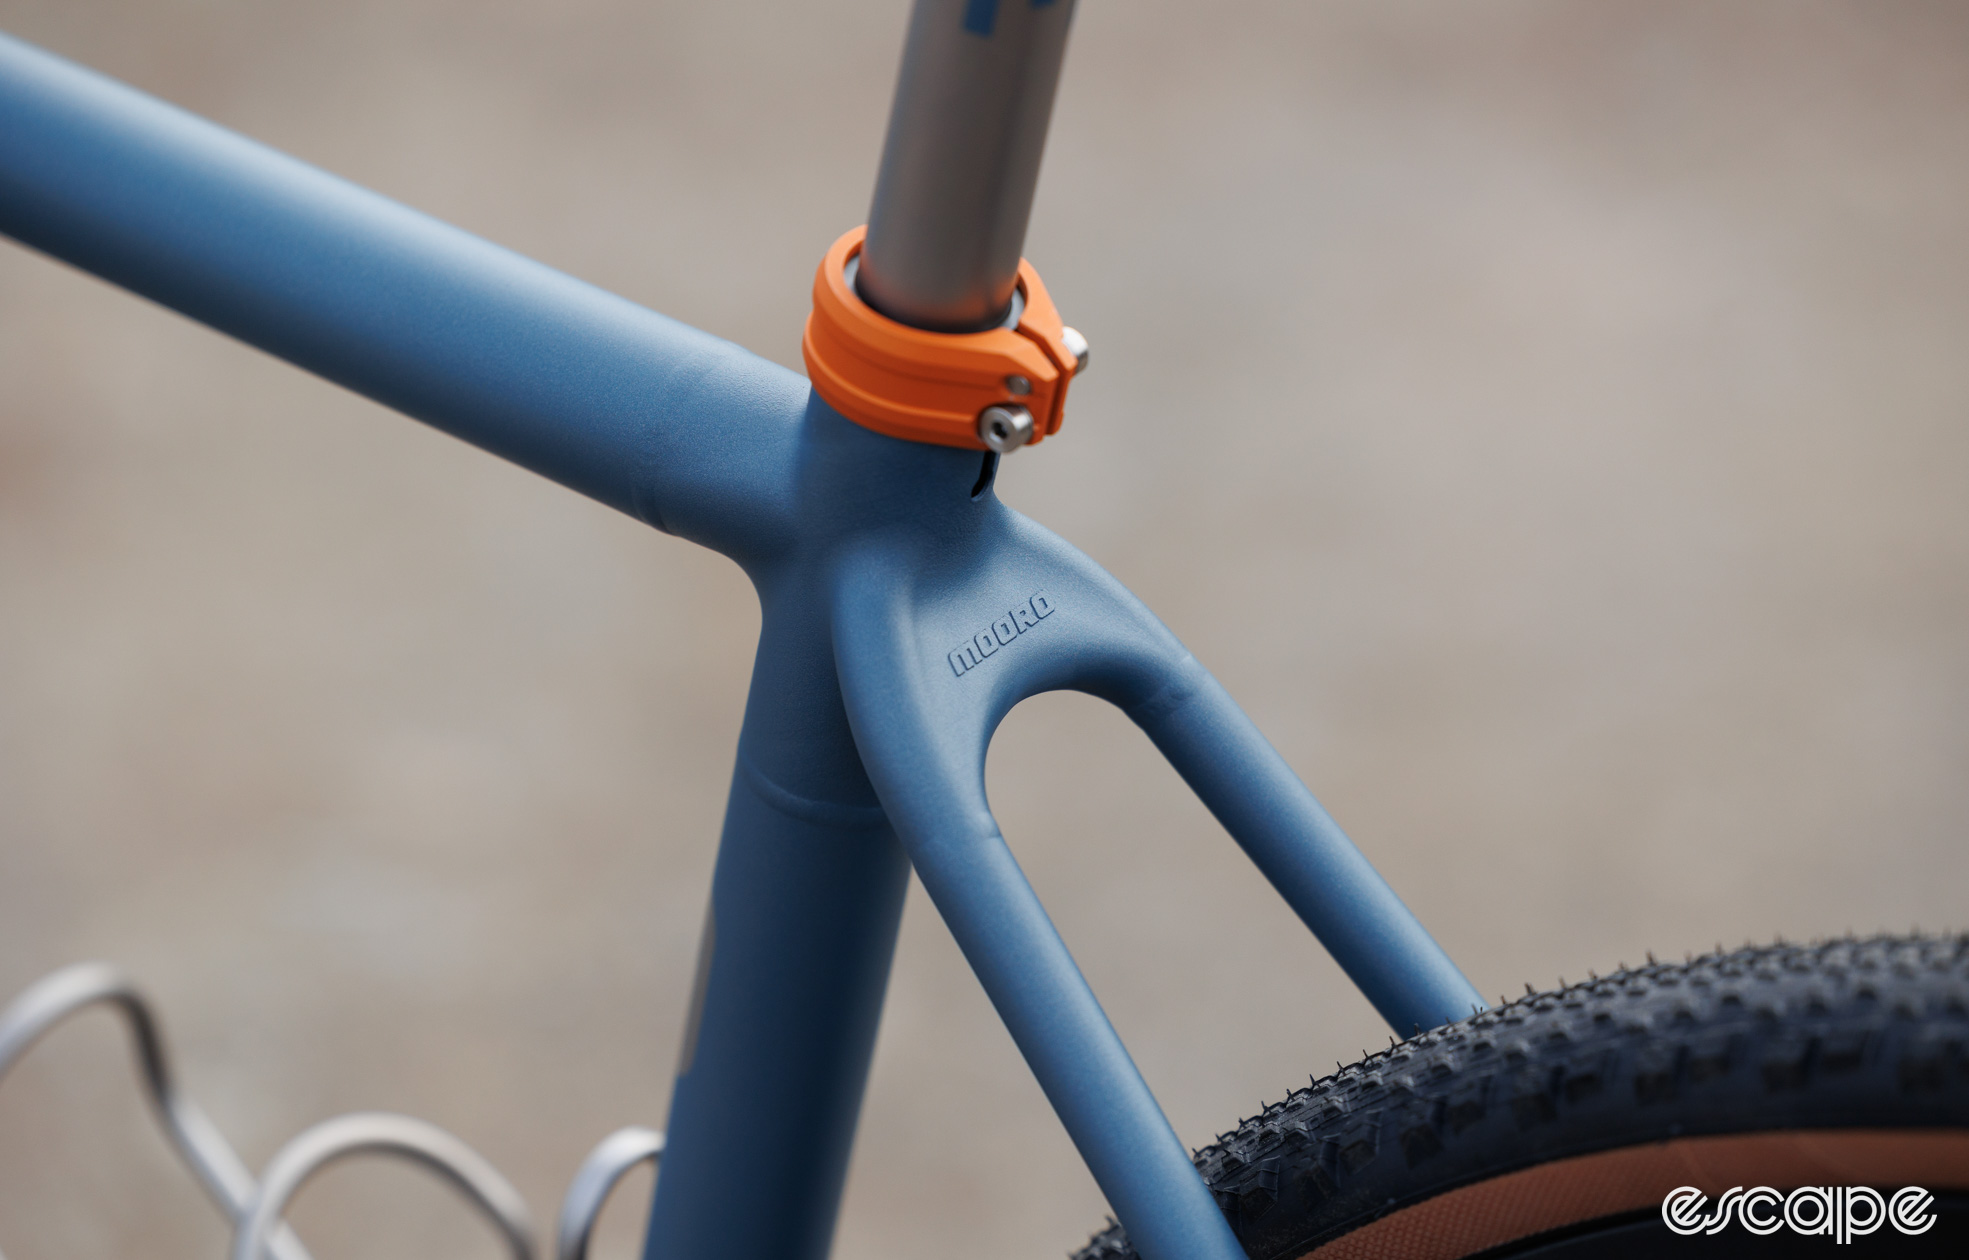 A 3D-printed titanium lug at the seat tube junction. 